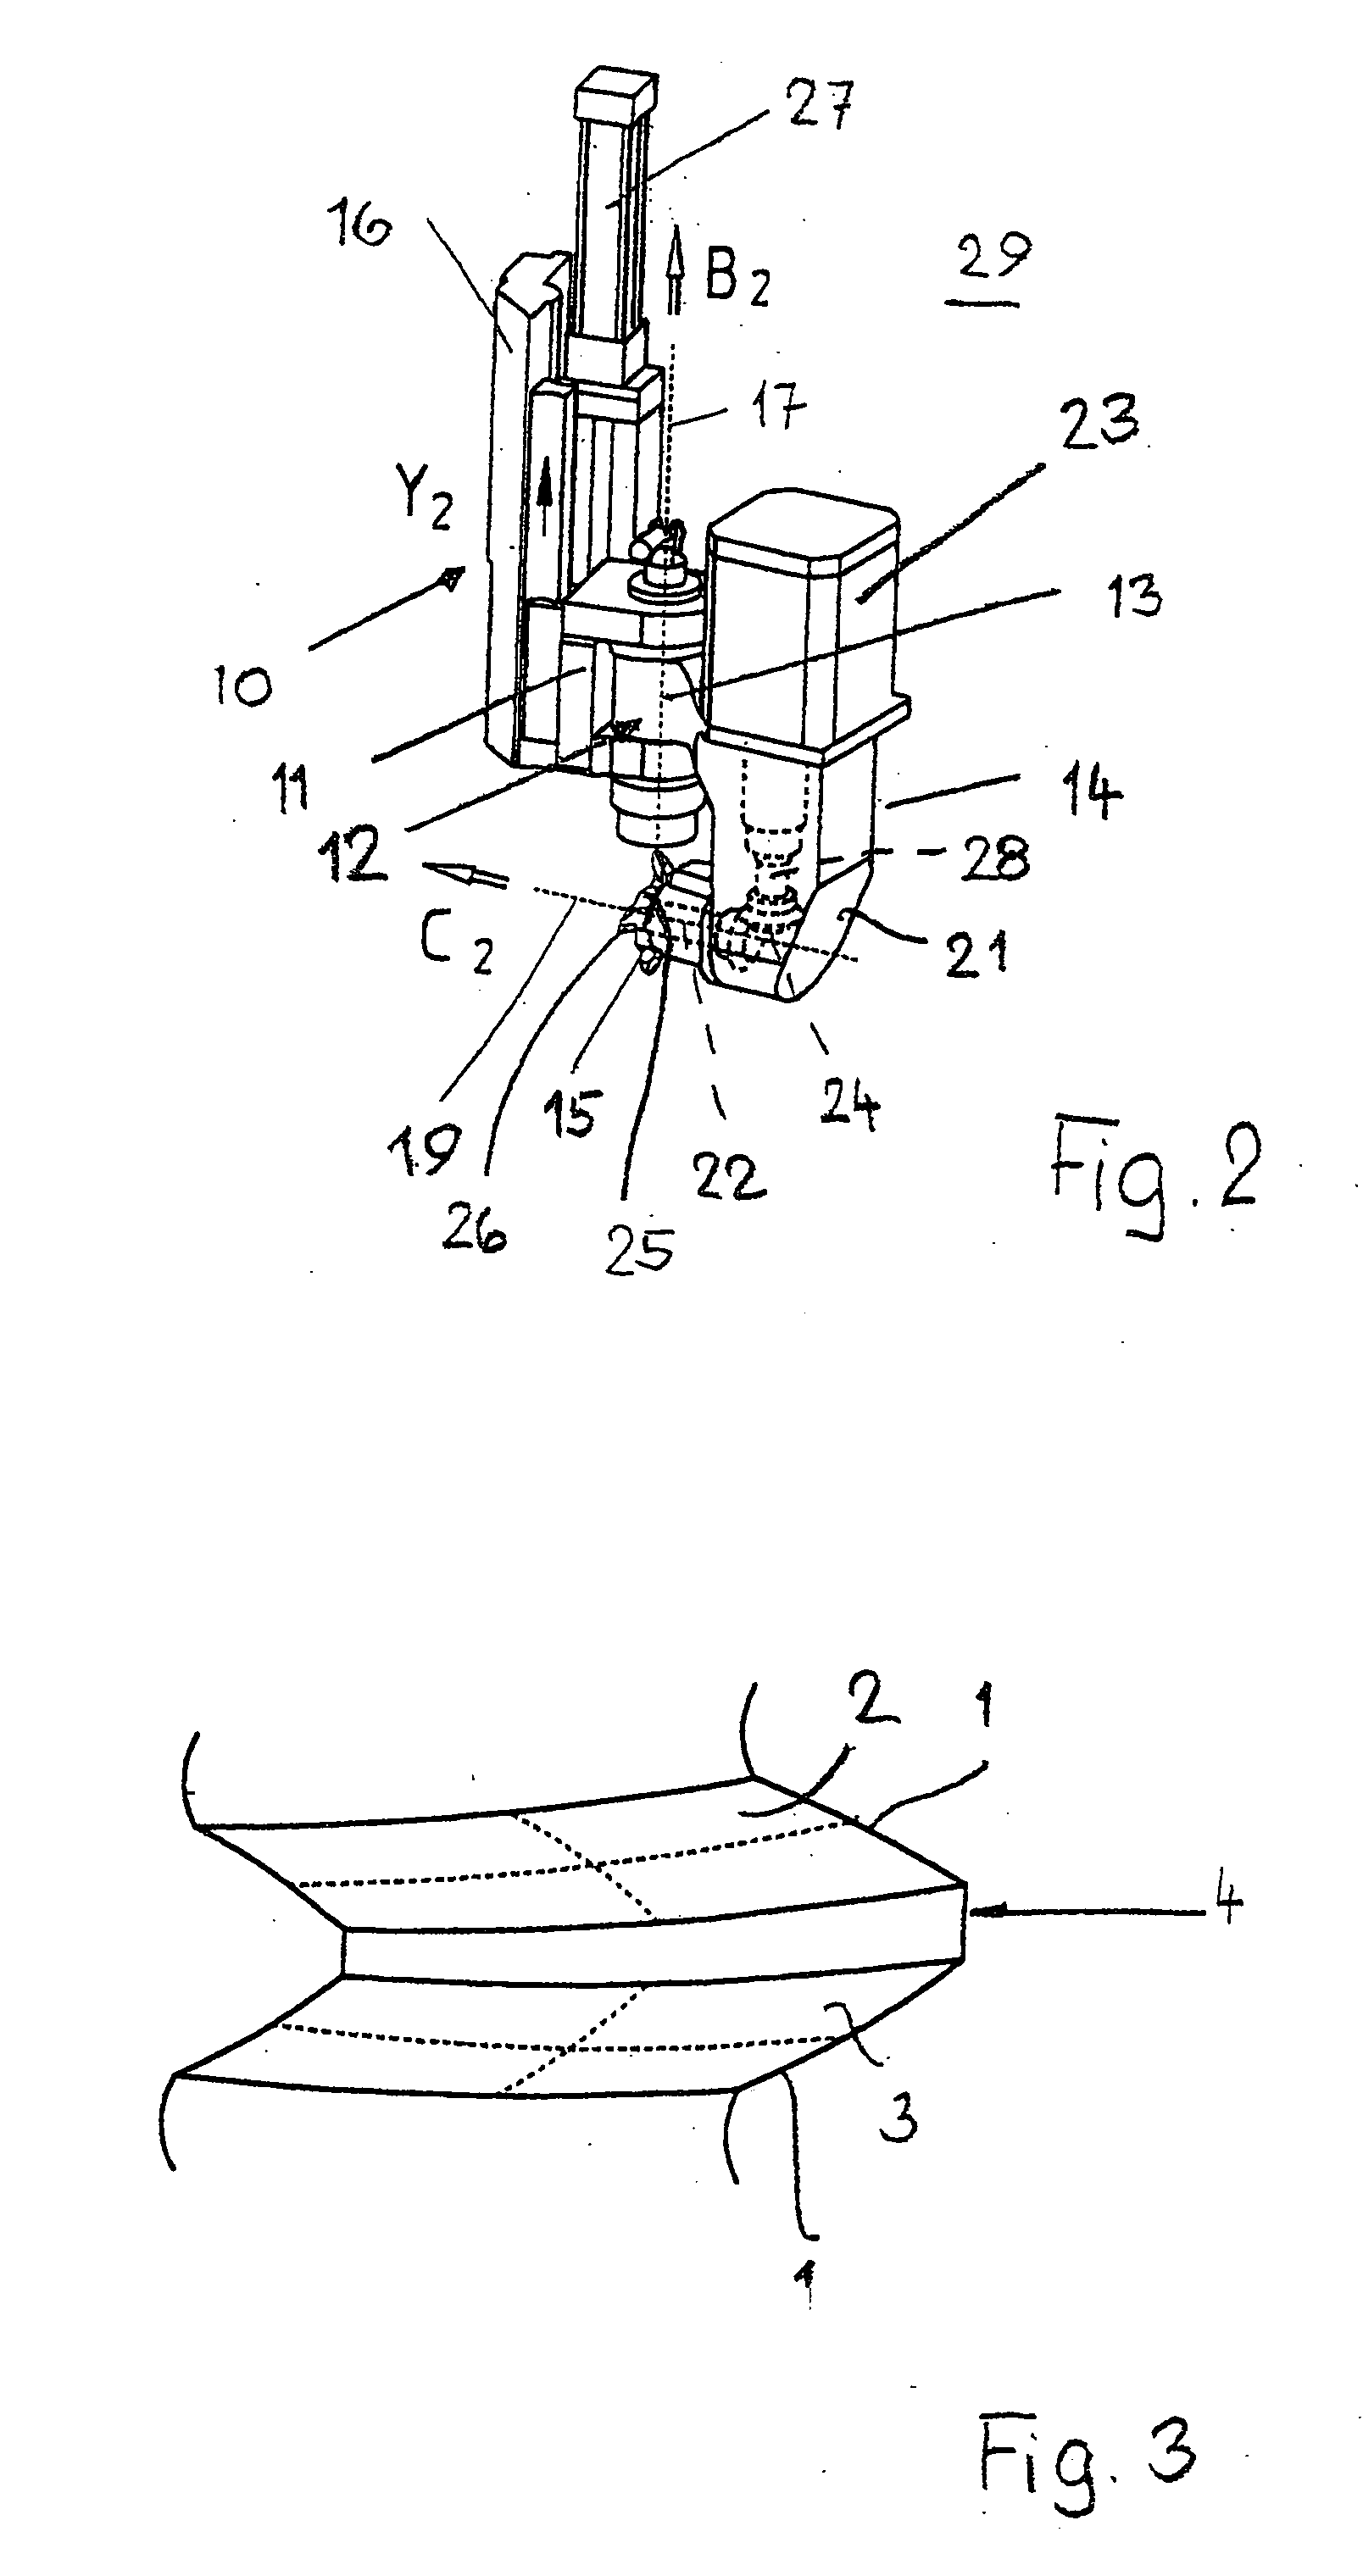 Gear cutting machine, in particular bevel gear cutting machine, having a device for chamfering / deburring the edges of a work piece